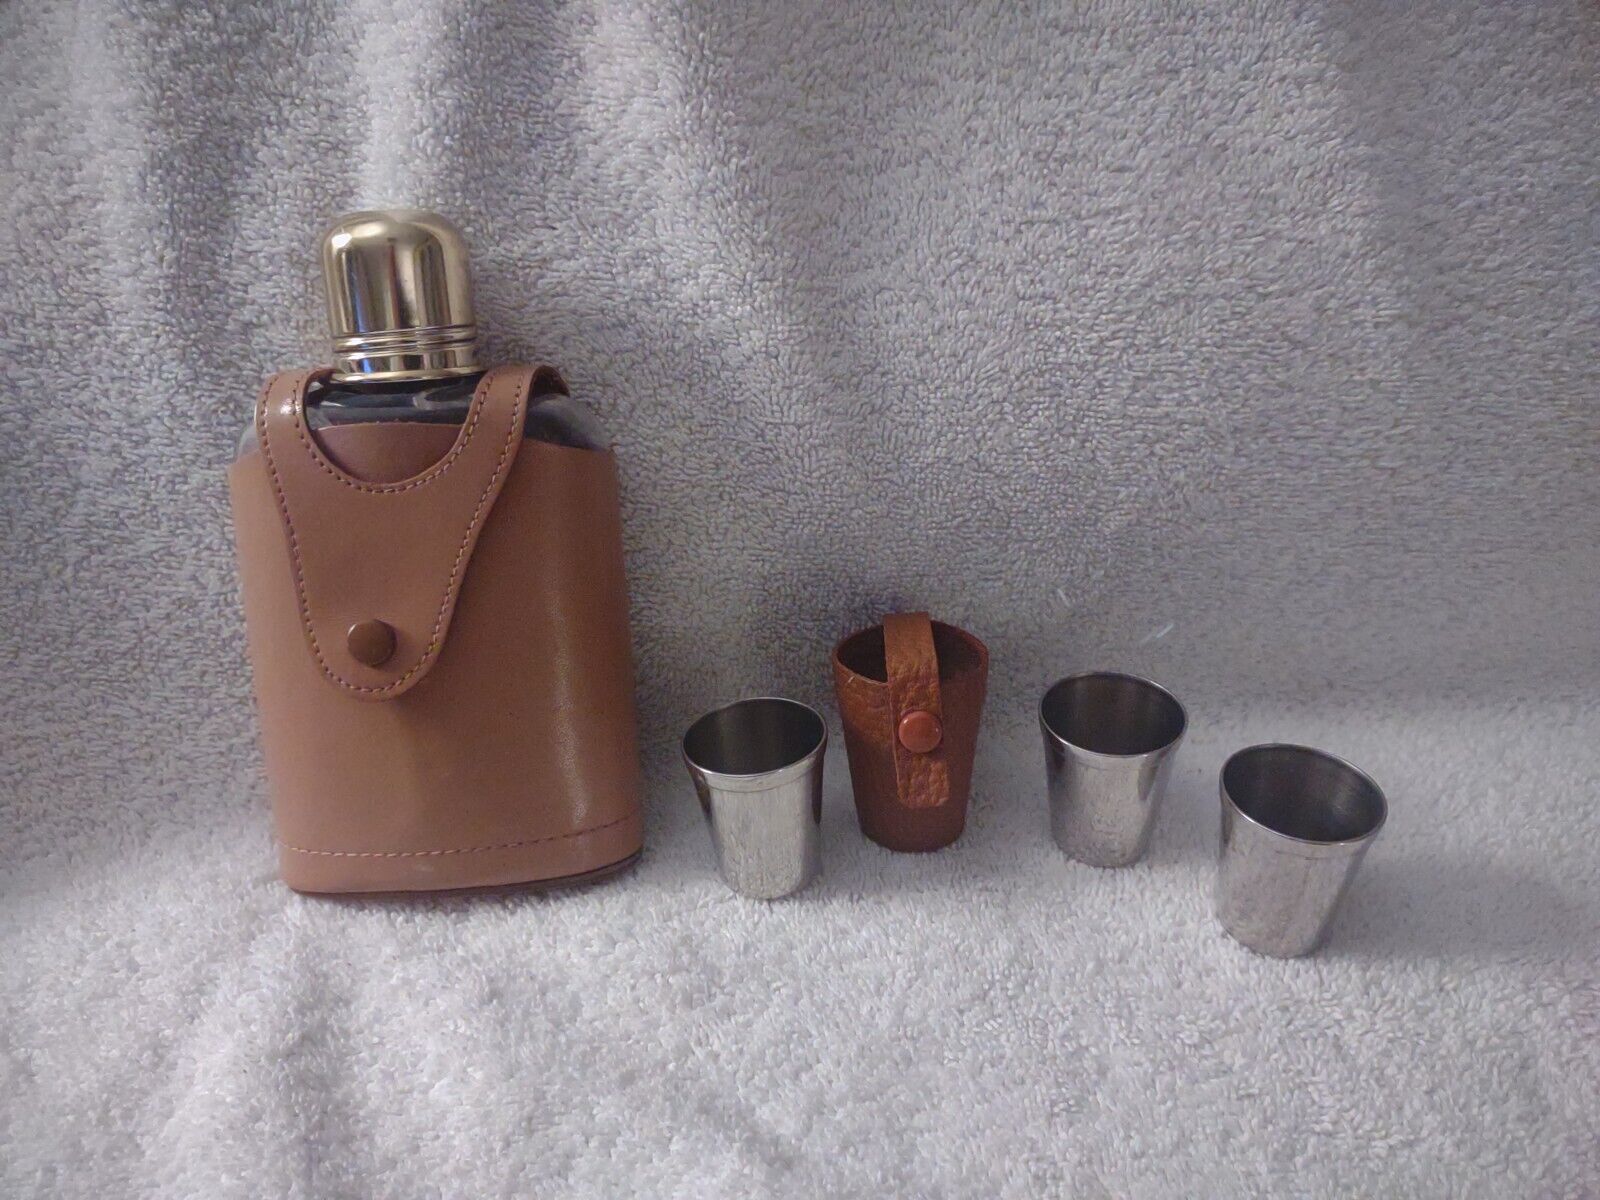 VTG Liquor Glass Container W/Top Grain Cowhide Protective Sleeve & 3 Shot Glass